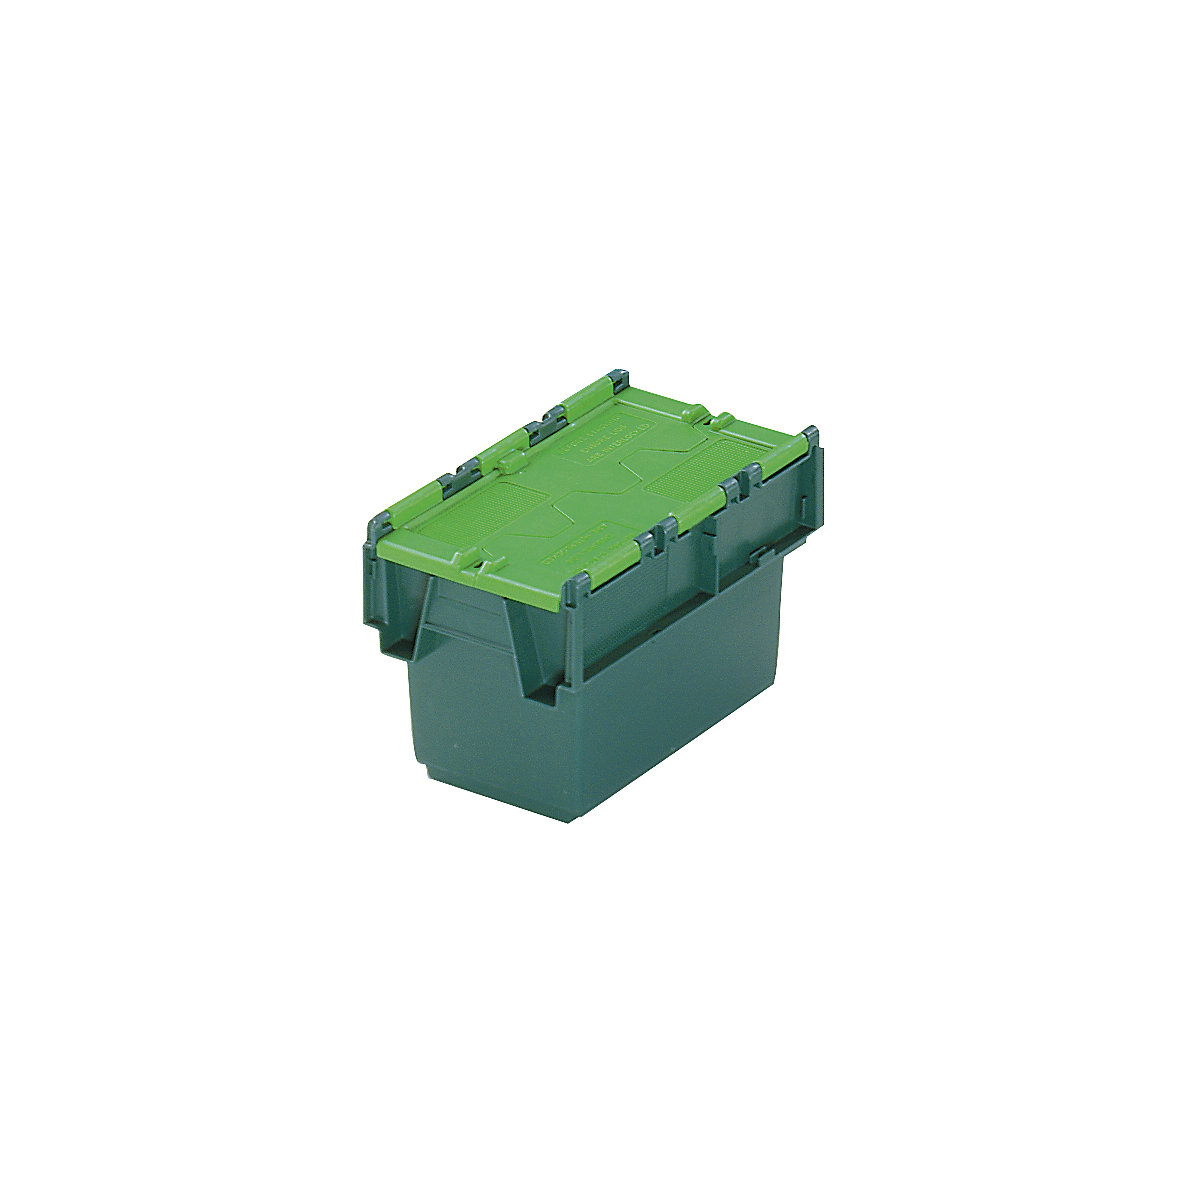 KAIMAN reusable stacking container, capacity 6 l, LxWxH 300 x 200 x 200 mm, green-5